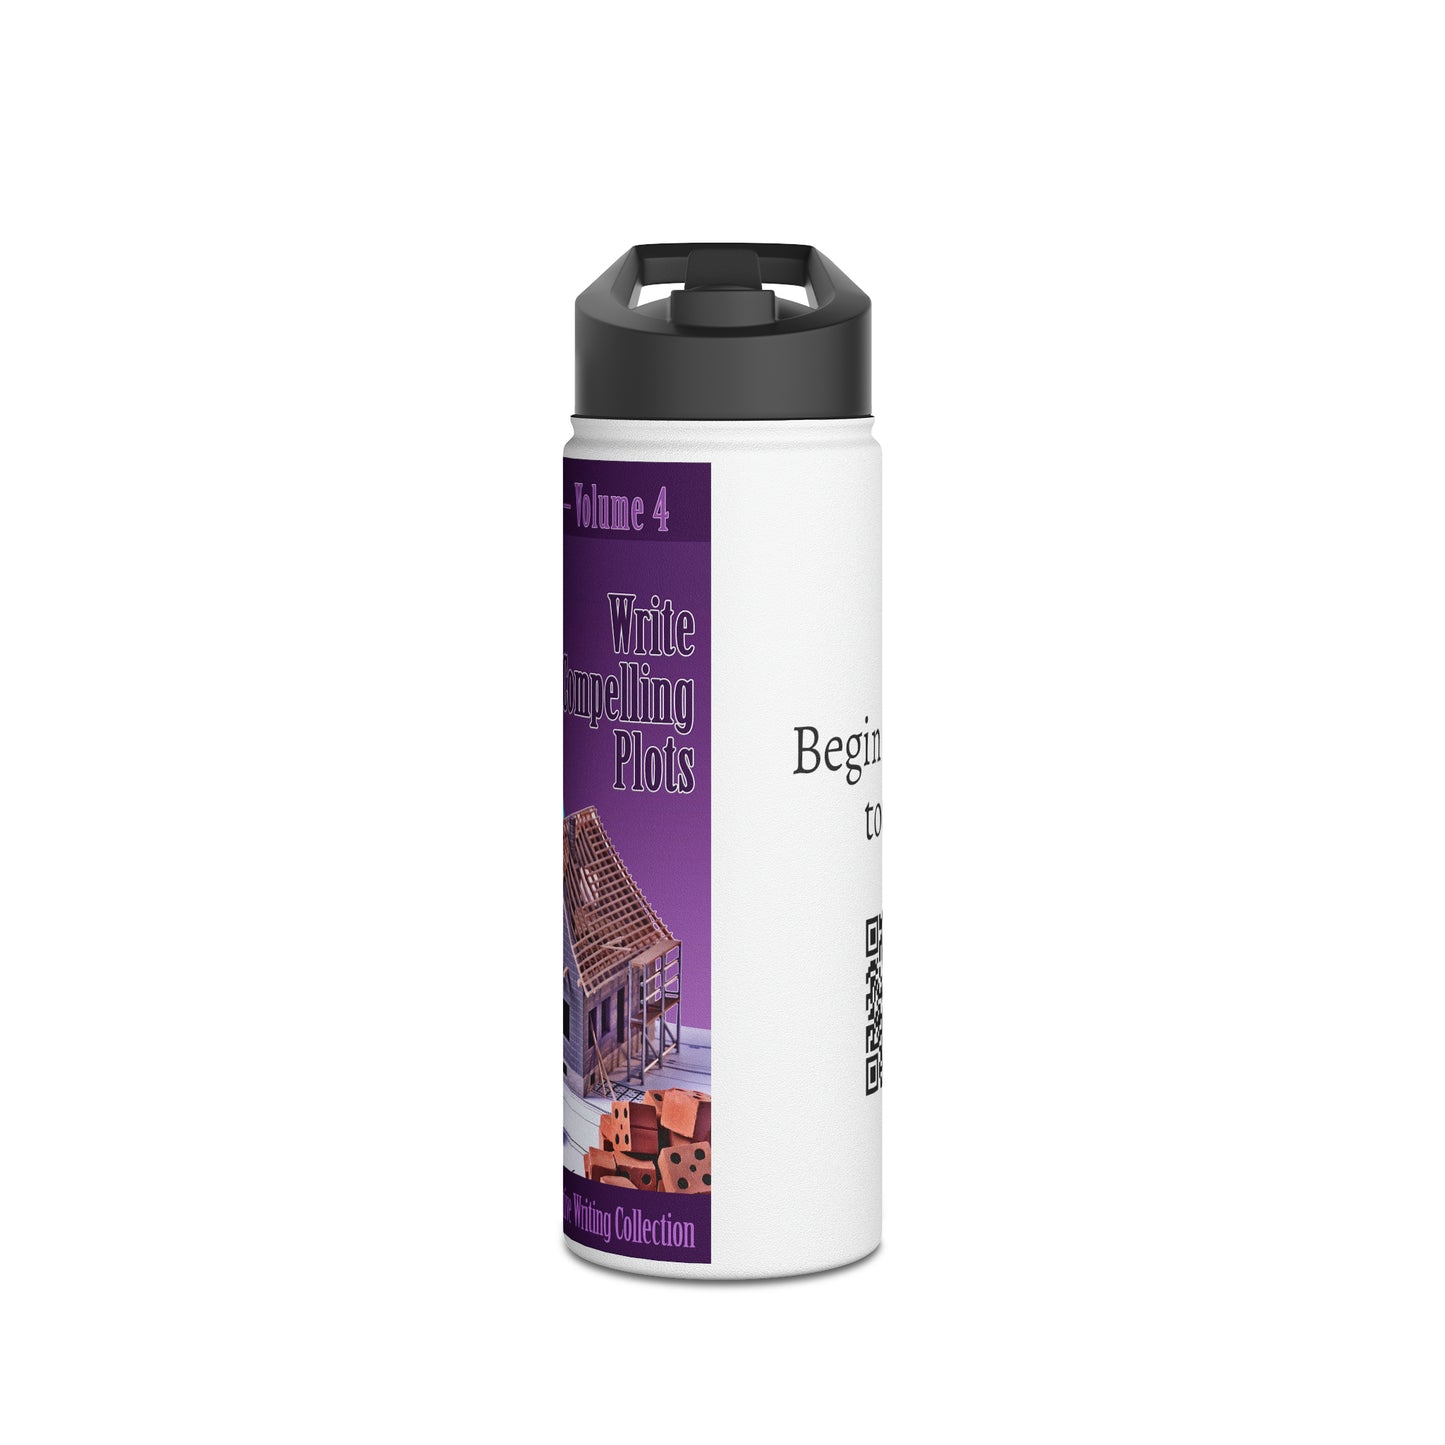 Write Compelling Plots - Stainless Steel Water Bottle